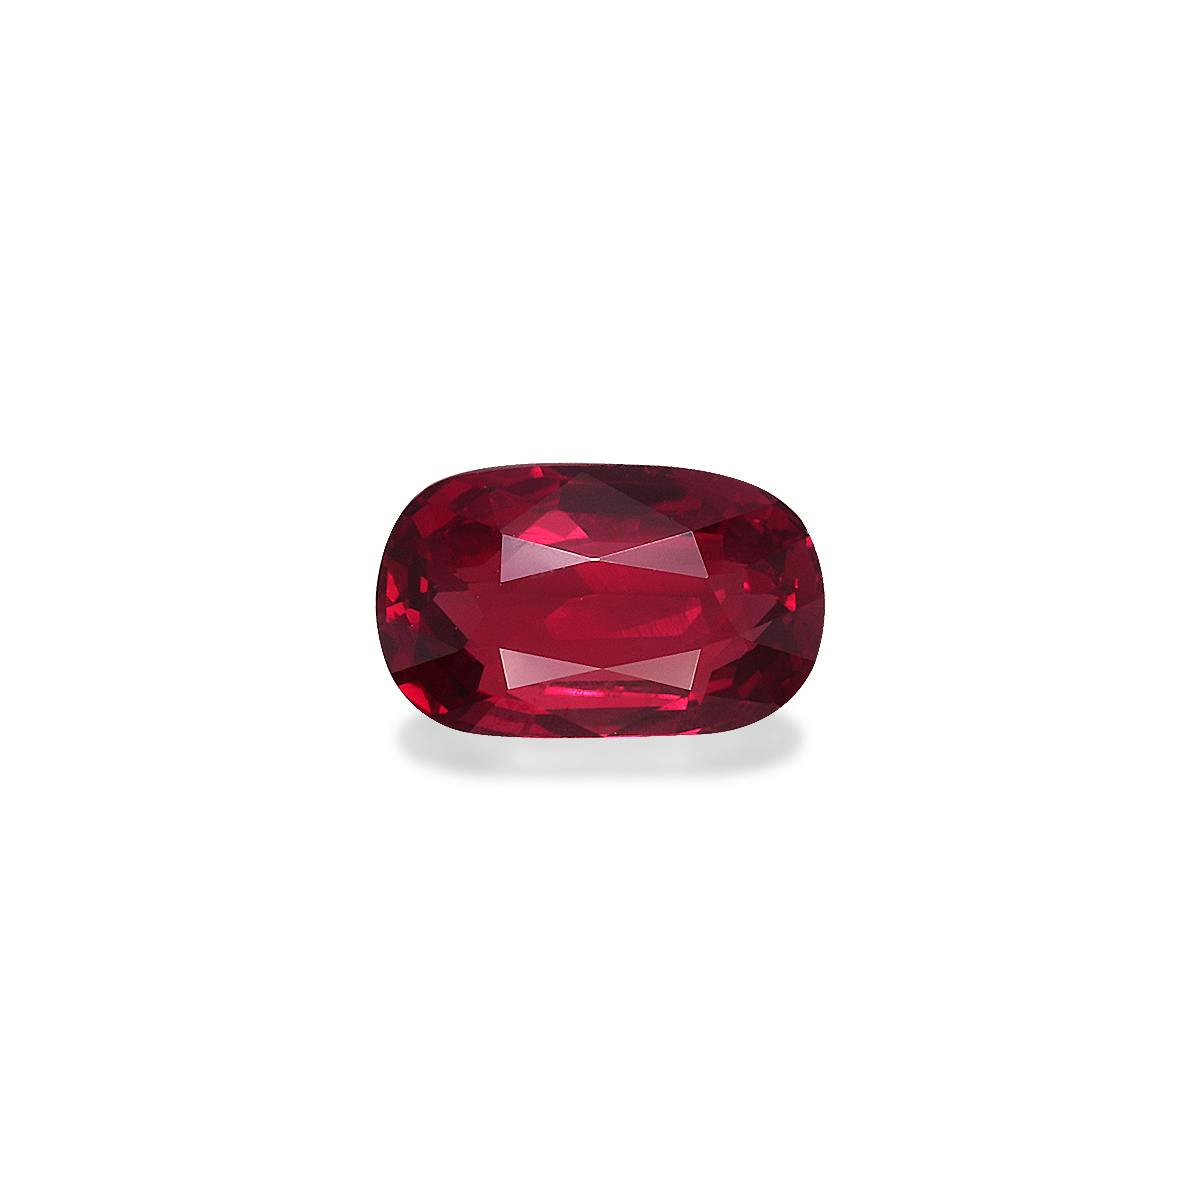 Details about   6.10 mm Pair Natural Mozambique Blood Red Ruby Square Cut Loose Certified Gems 